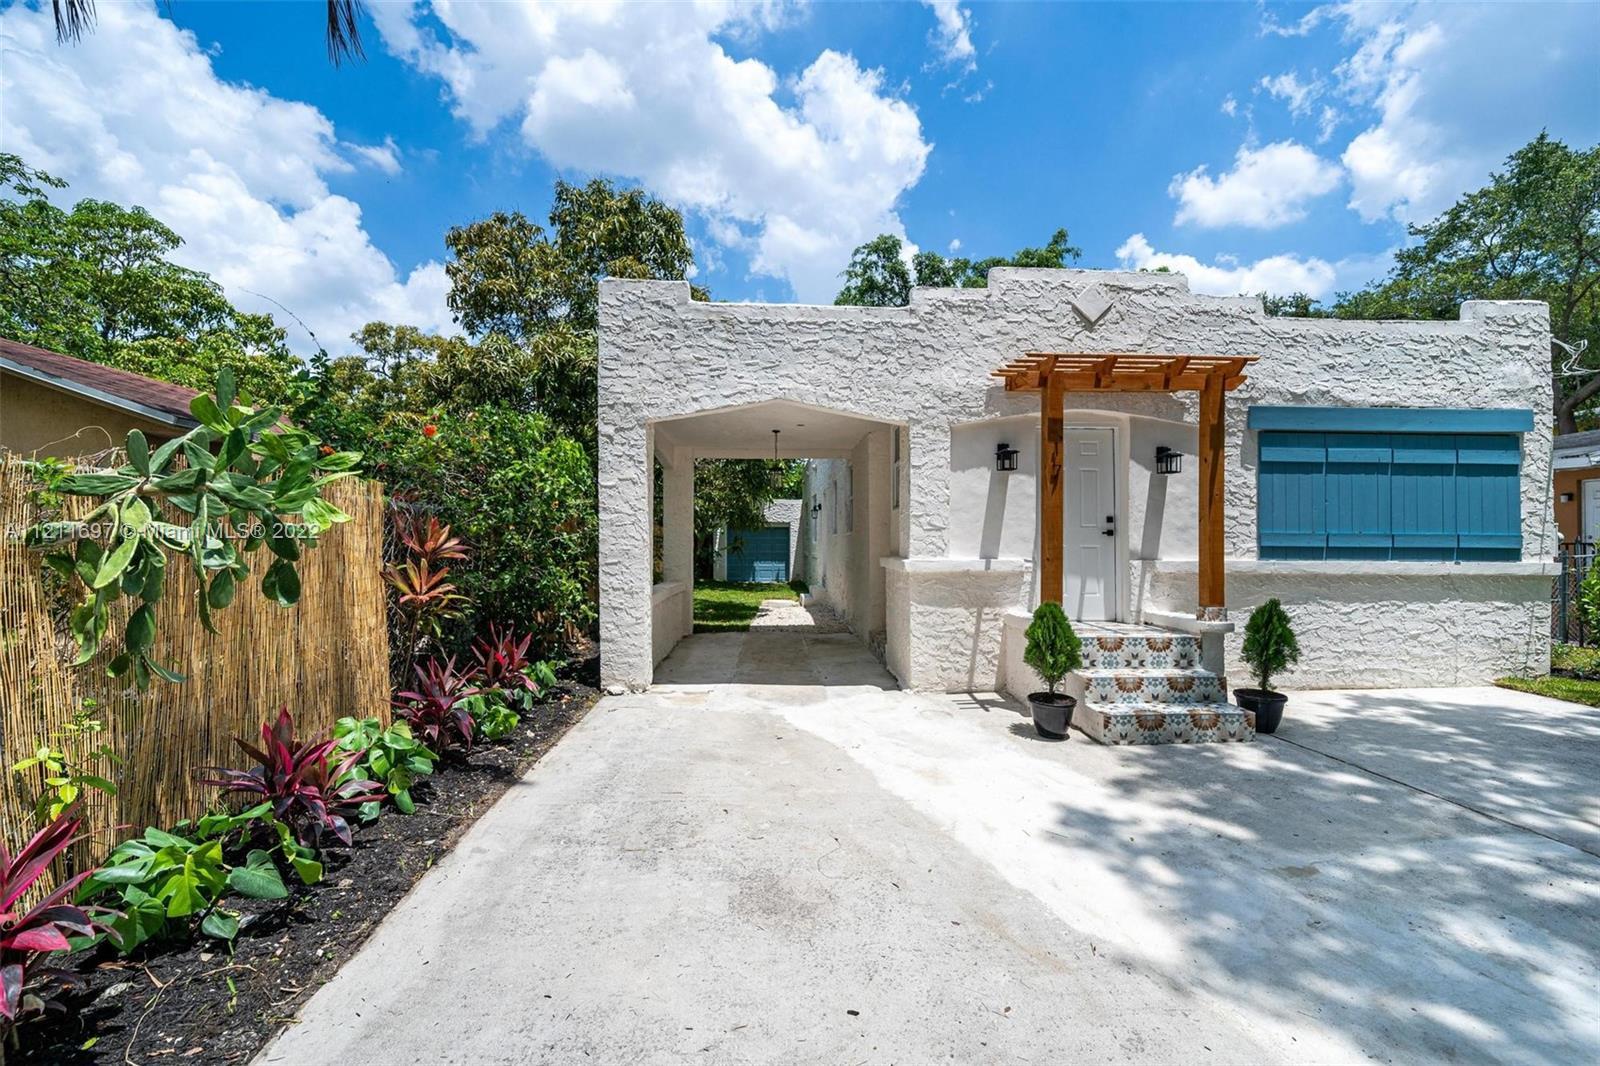 BEAUTIFULLY RENOVATED HOME IN THE MOST DESIRABLE AREA! This large 4-bedroom/2-bathroom completely re